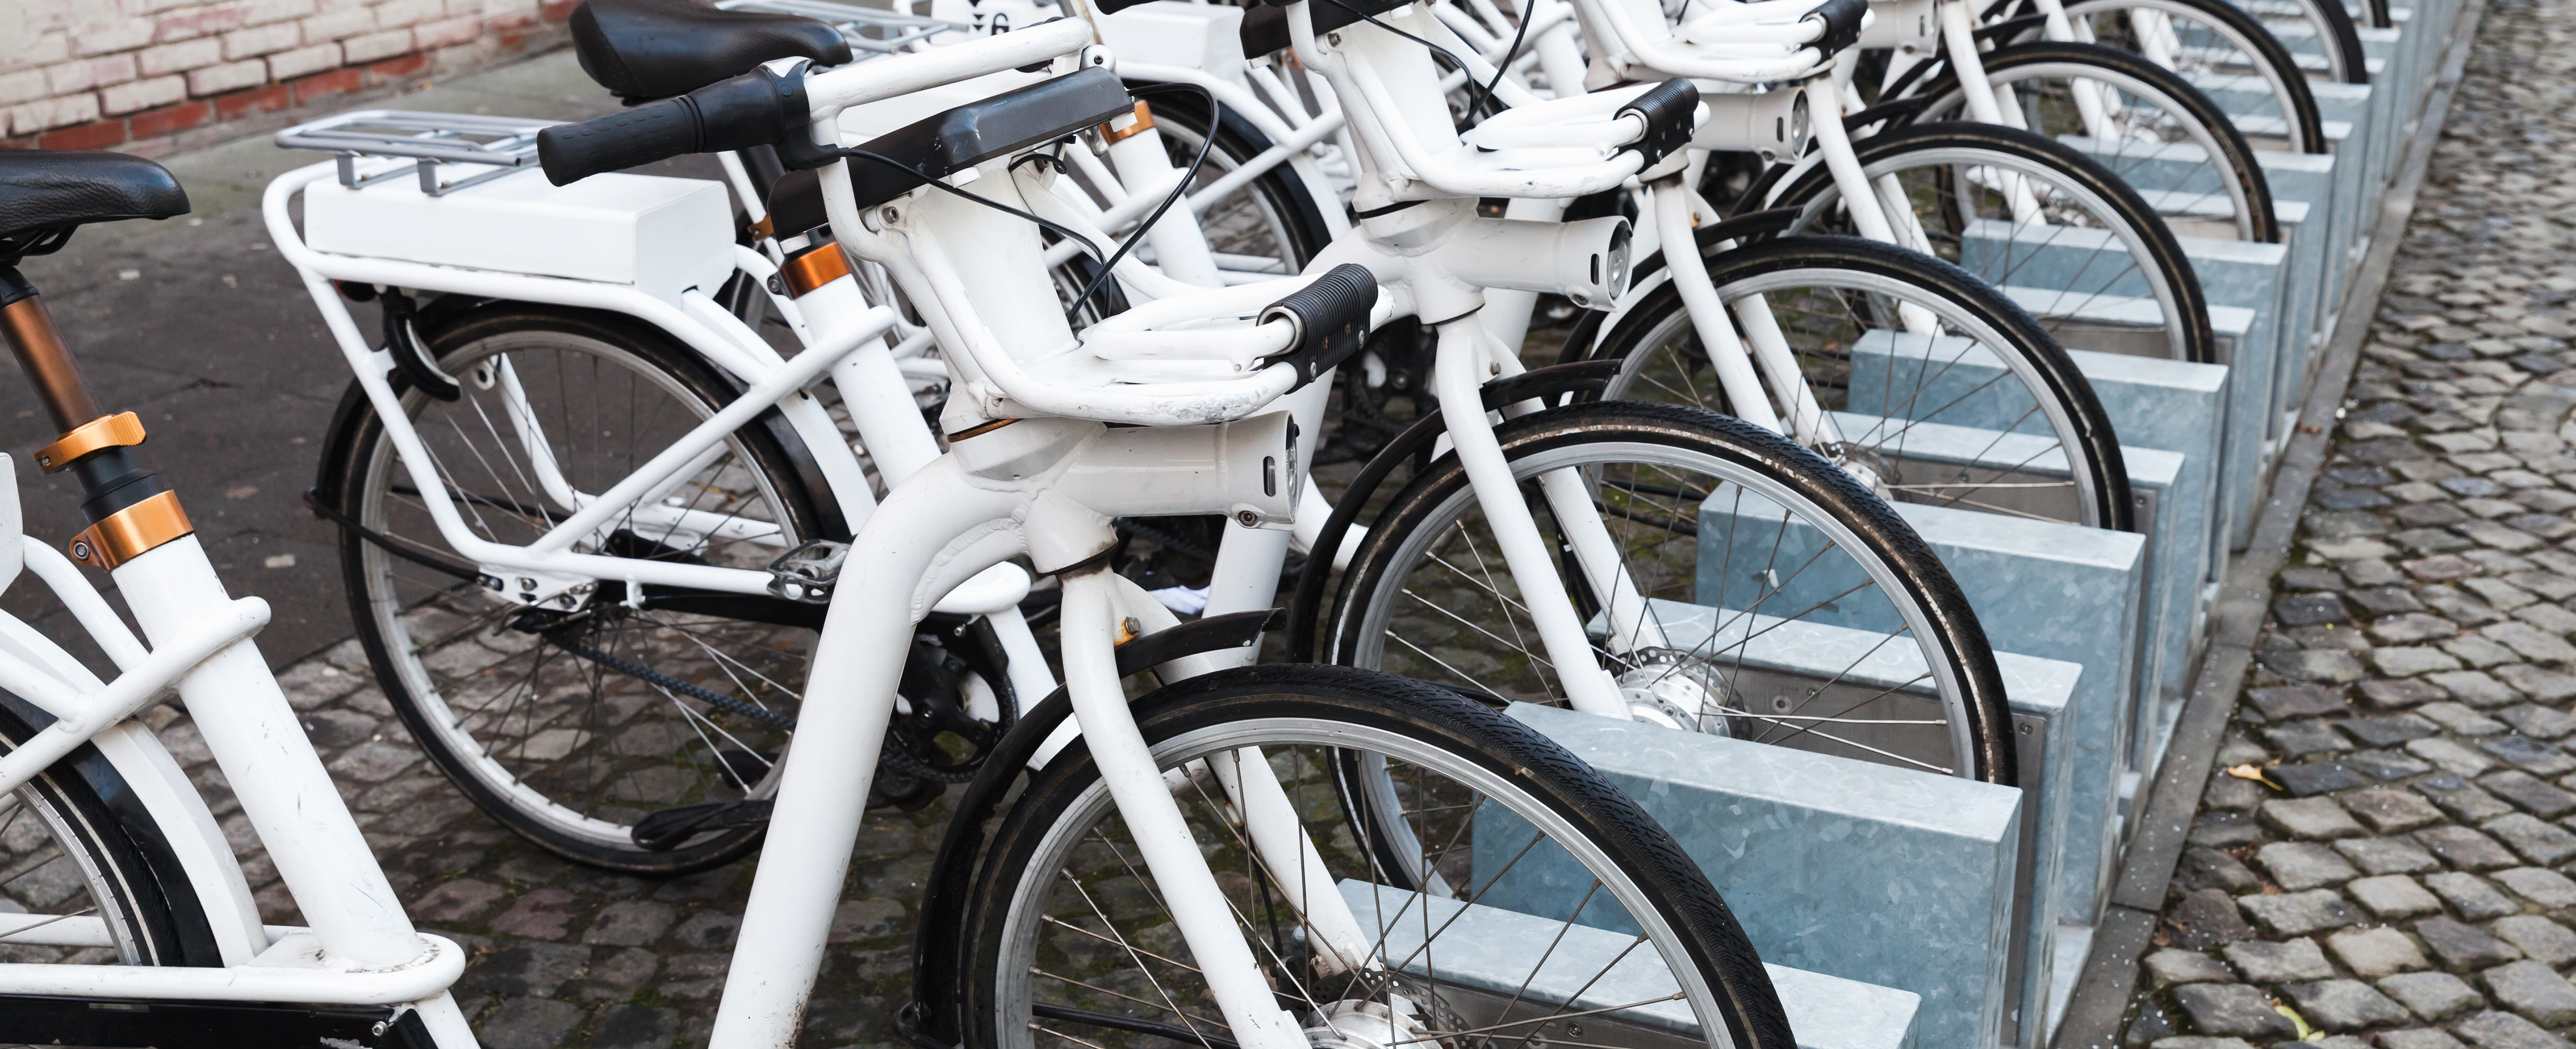 forhold Landskab smog The city bike and other bike-share schemes - Cycling Embassy of Denmark